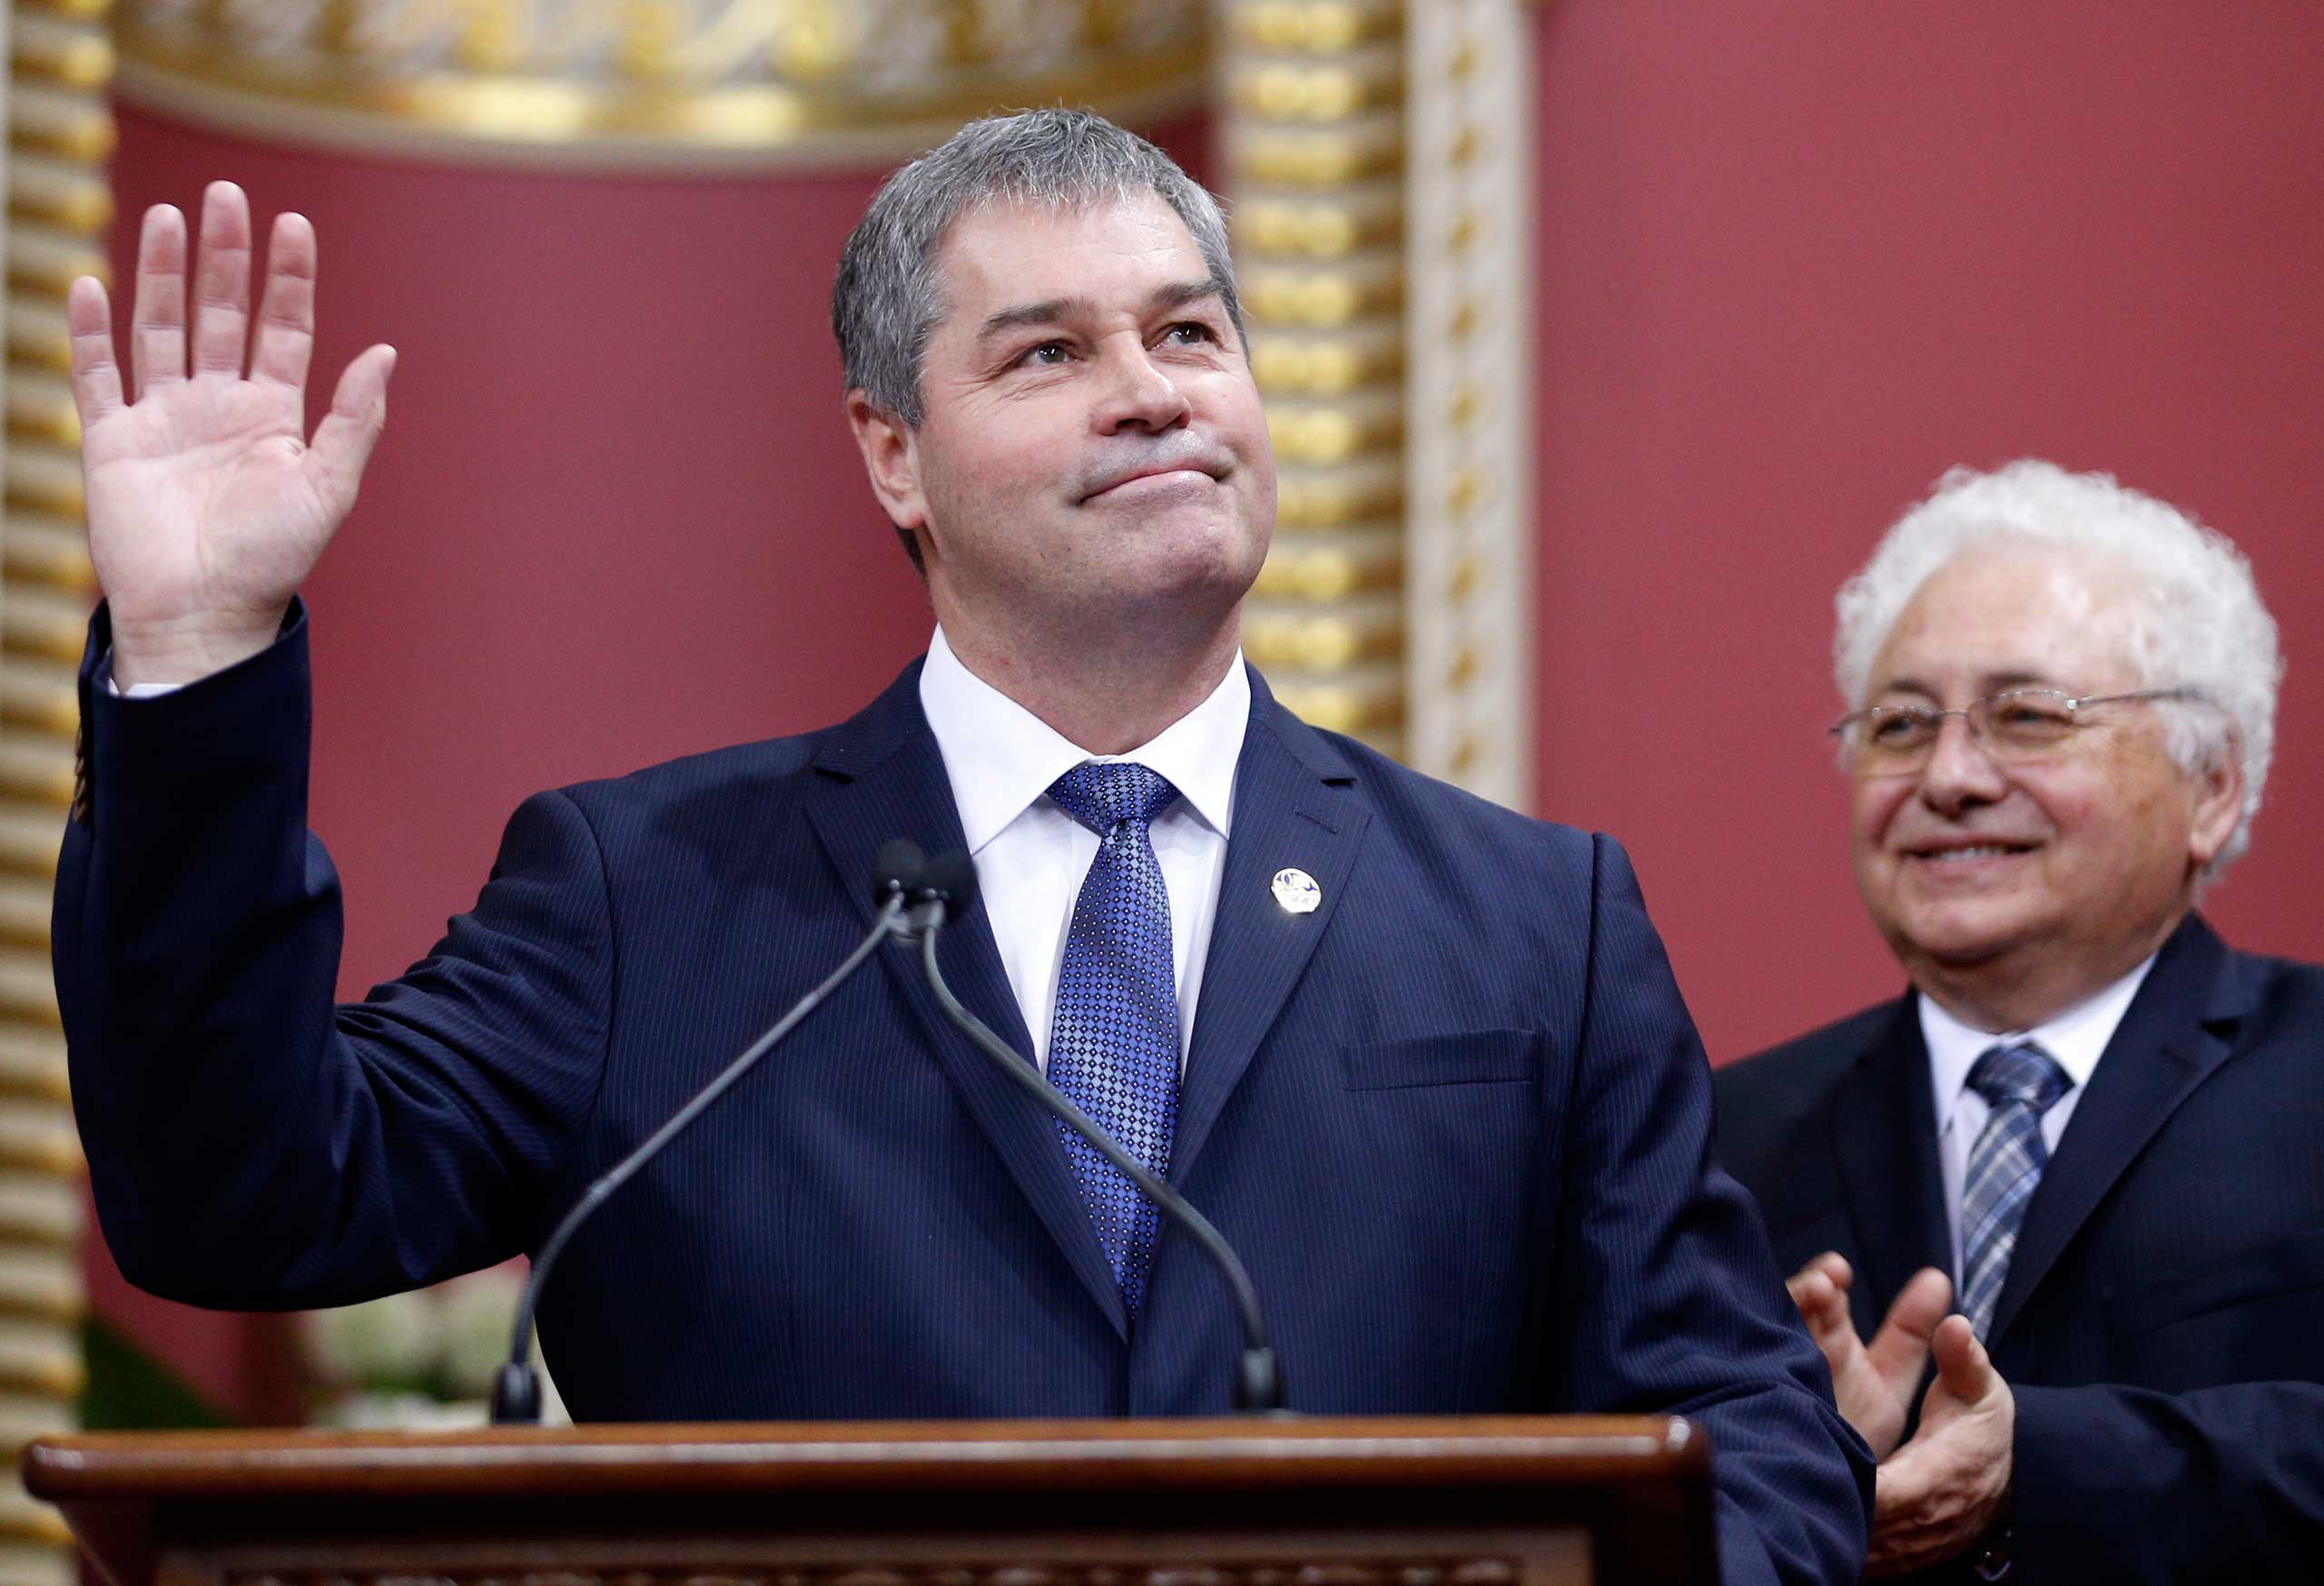 Quebec's Minister of Education Yves Bolduc waves to the crowd after being appointed by Premier Philippe Couillard during a swearing-in ceremony at the National Assembly in Quebec City, April 23, 2014. (Mathieu Belanger—Reuters)